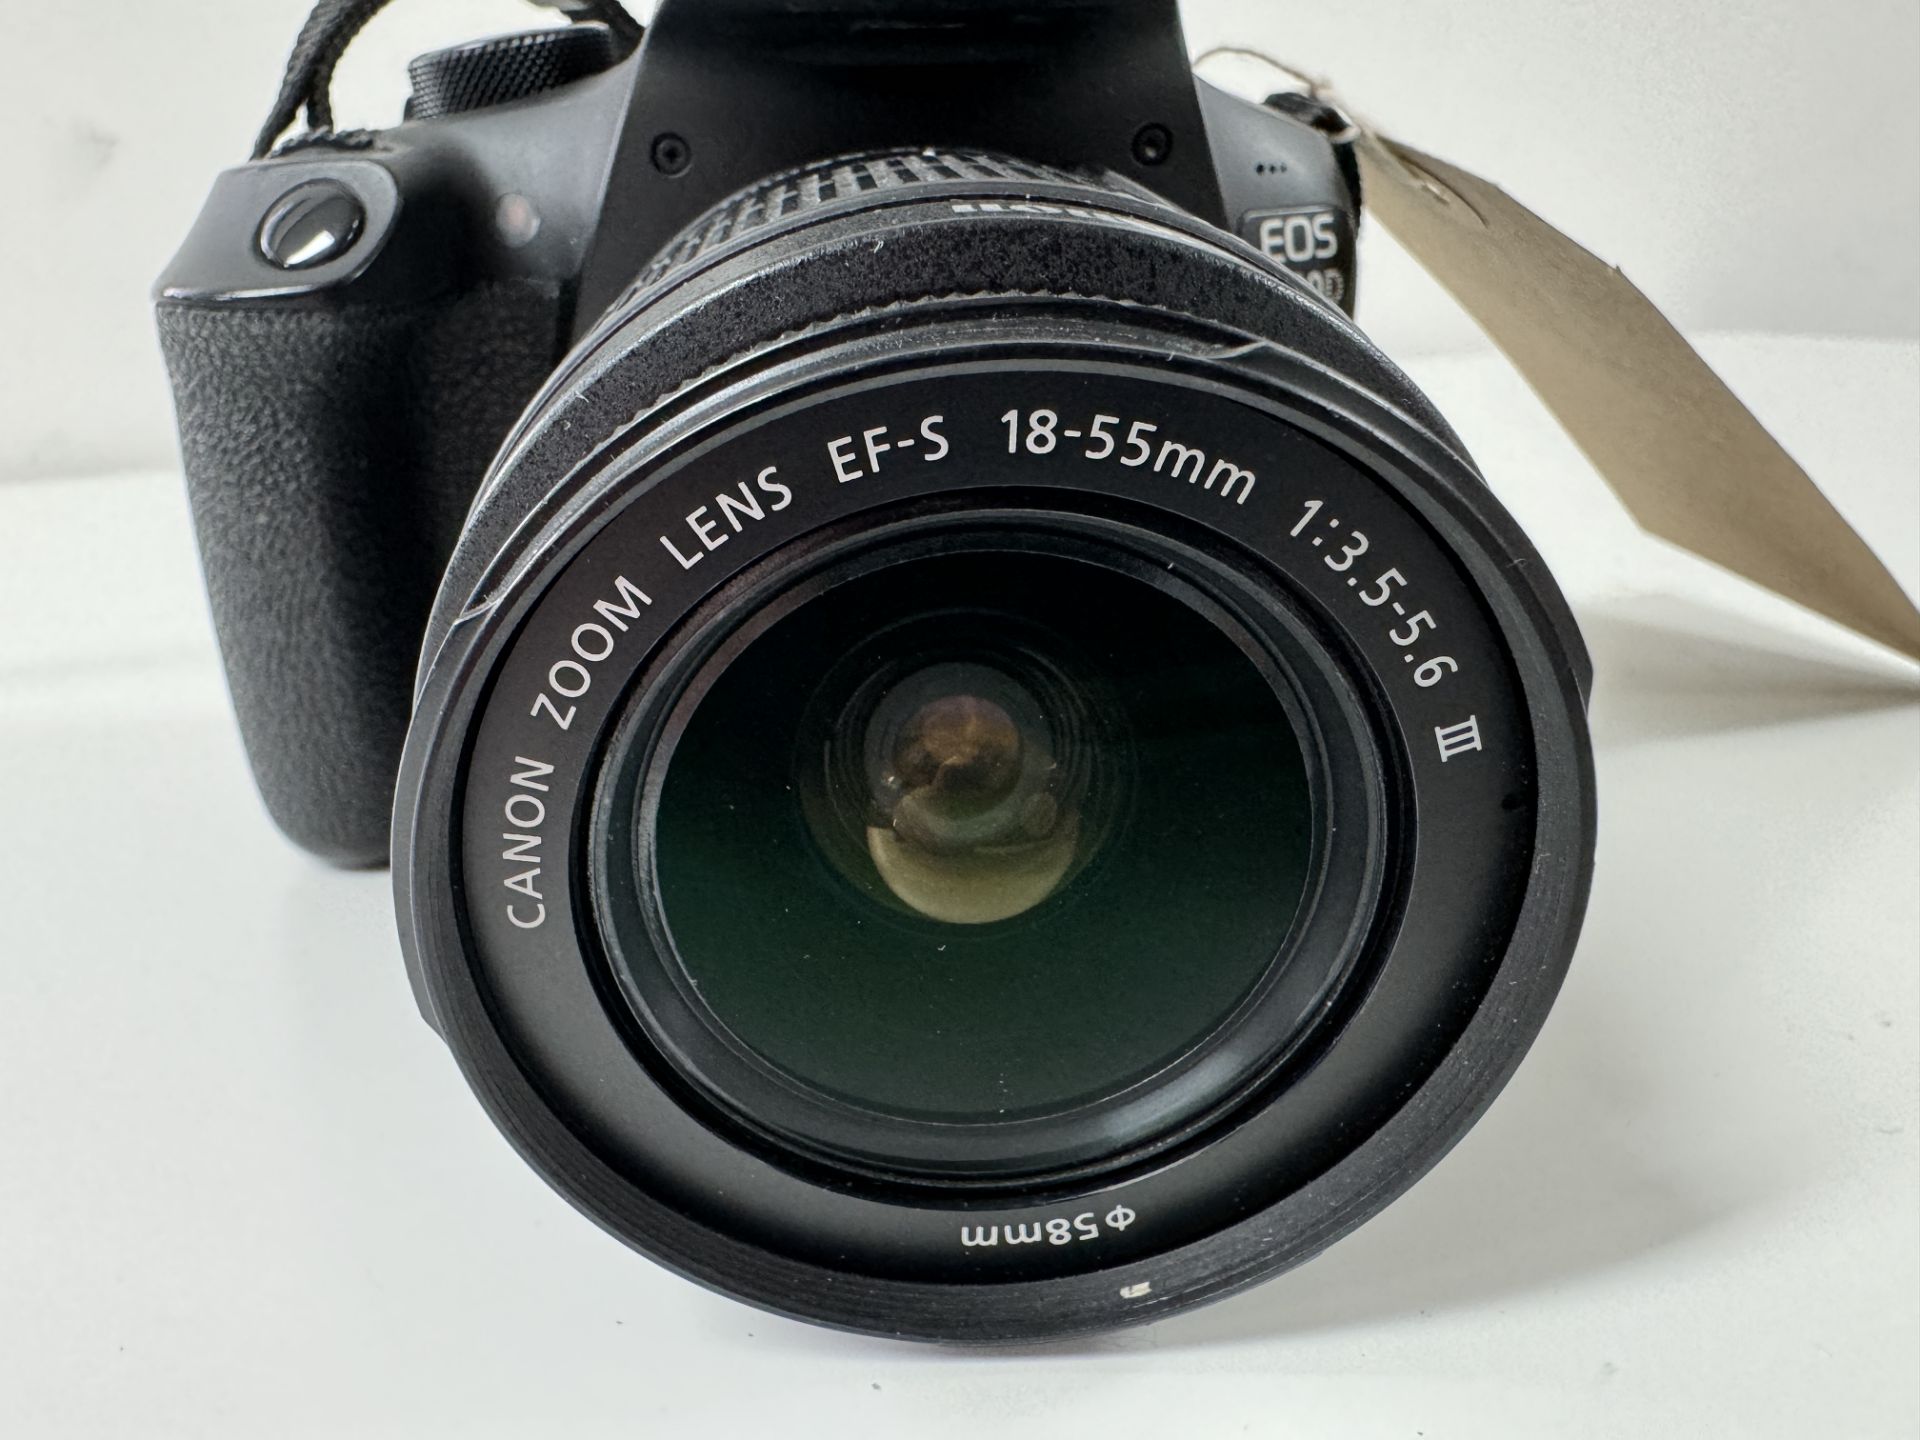 Canon DS12662 DSLR Camera, Serial Number 123072035524 with Canon Zoom Lens EF-S 18-55mm 1:3.5-5.6 - Image 4 of 4